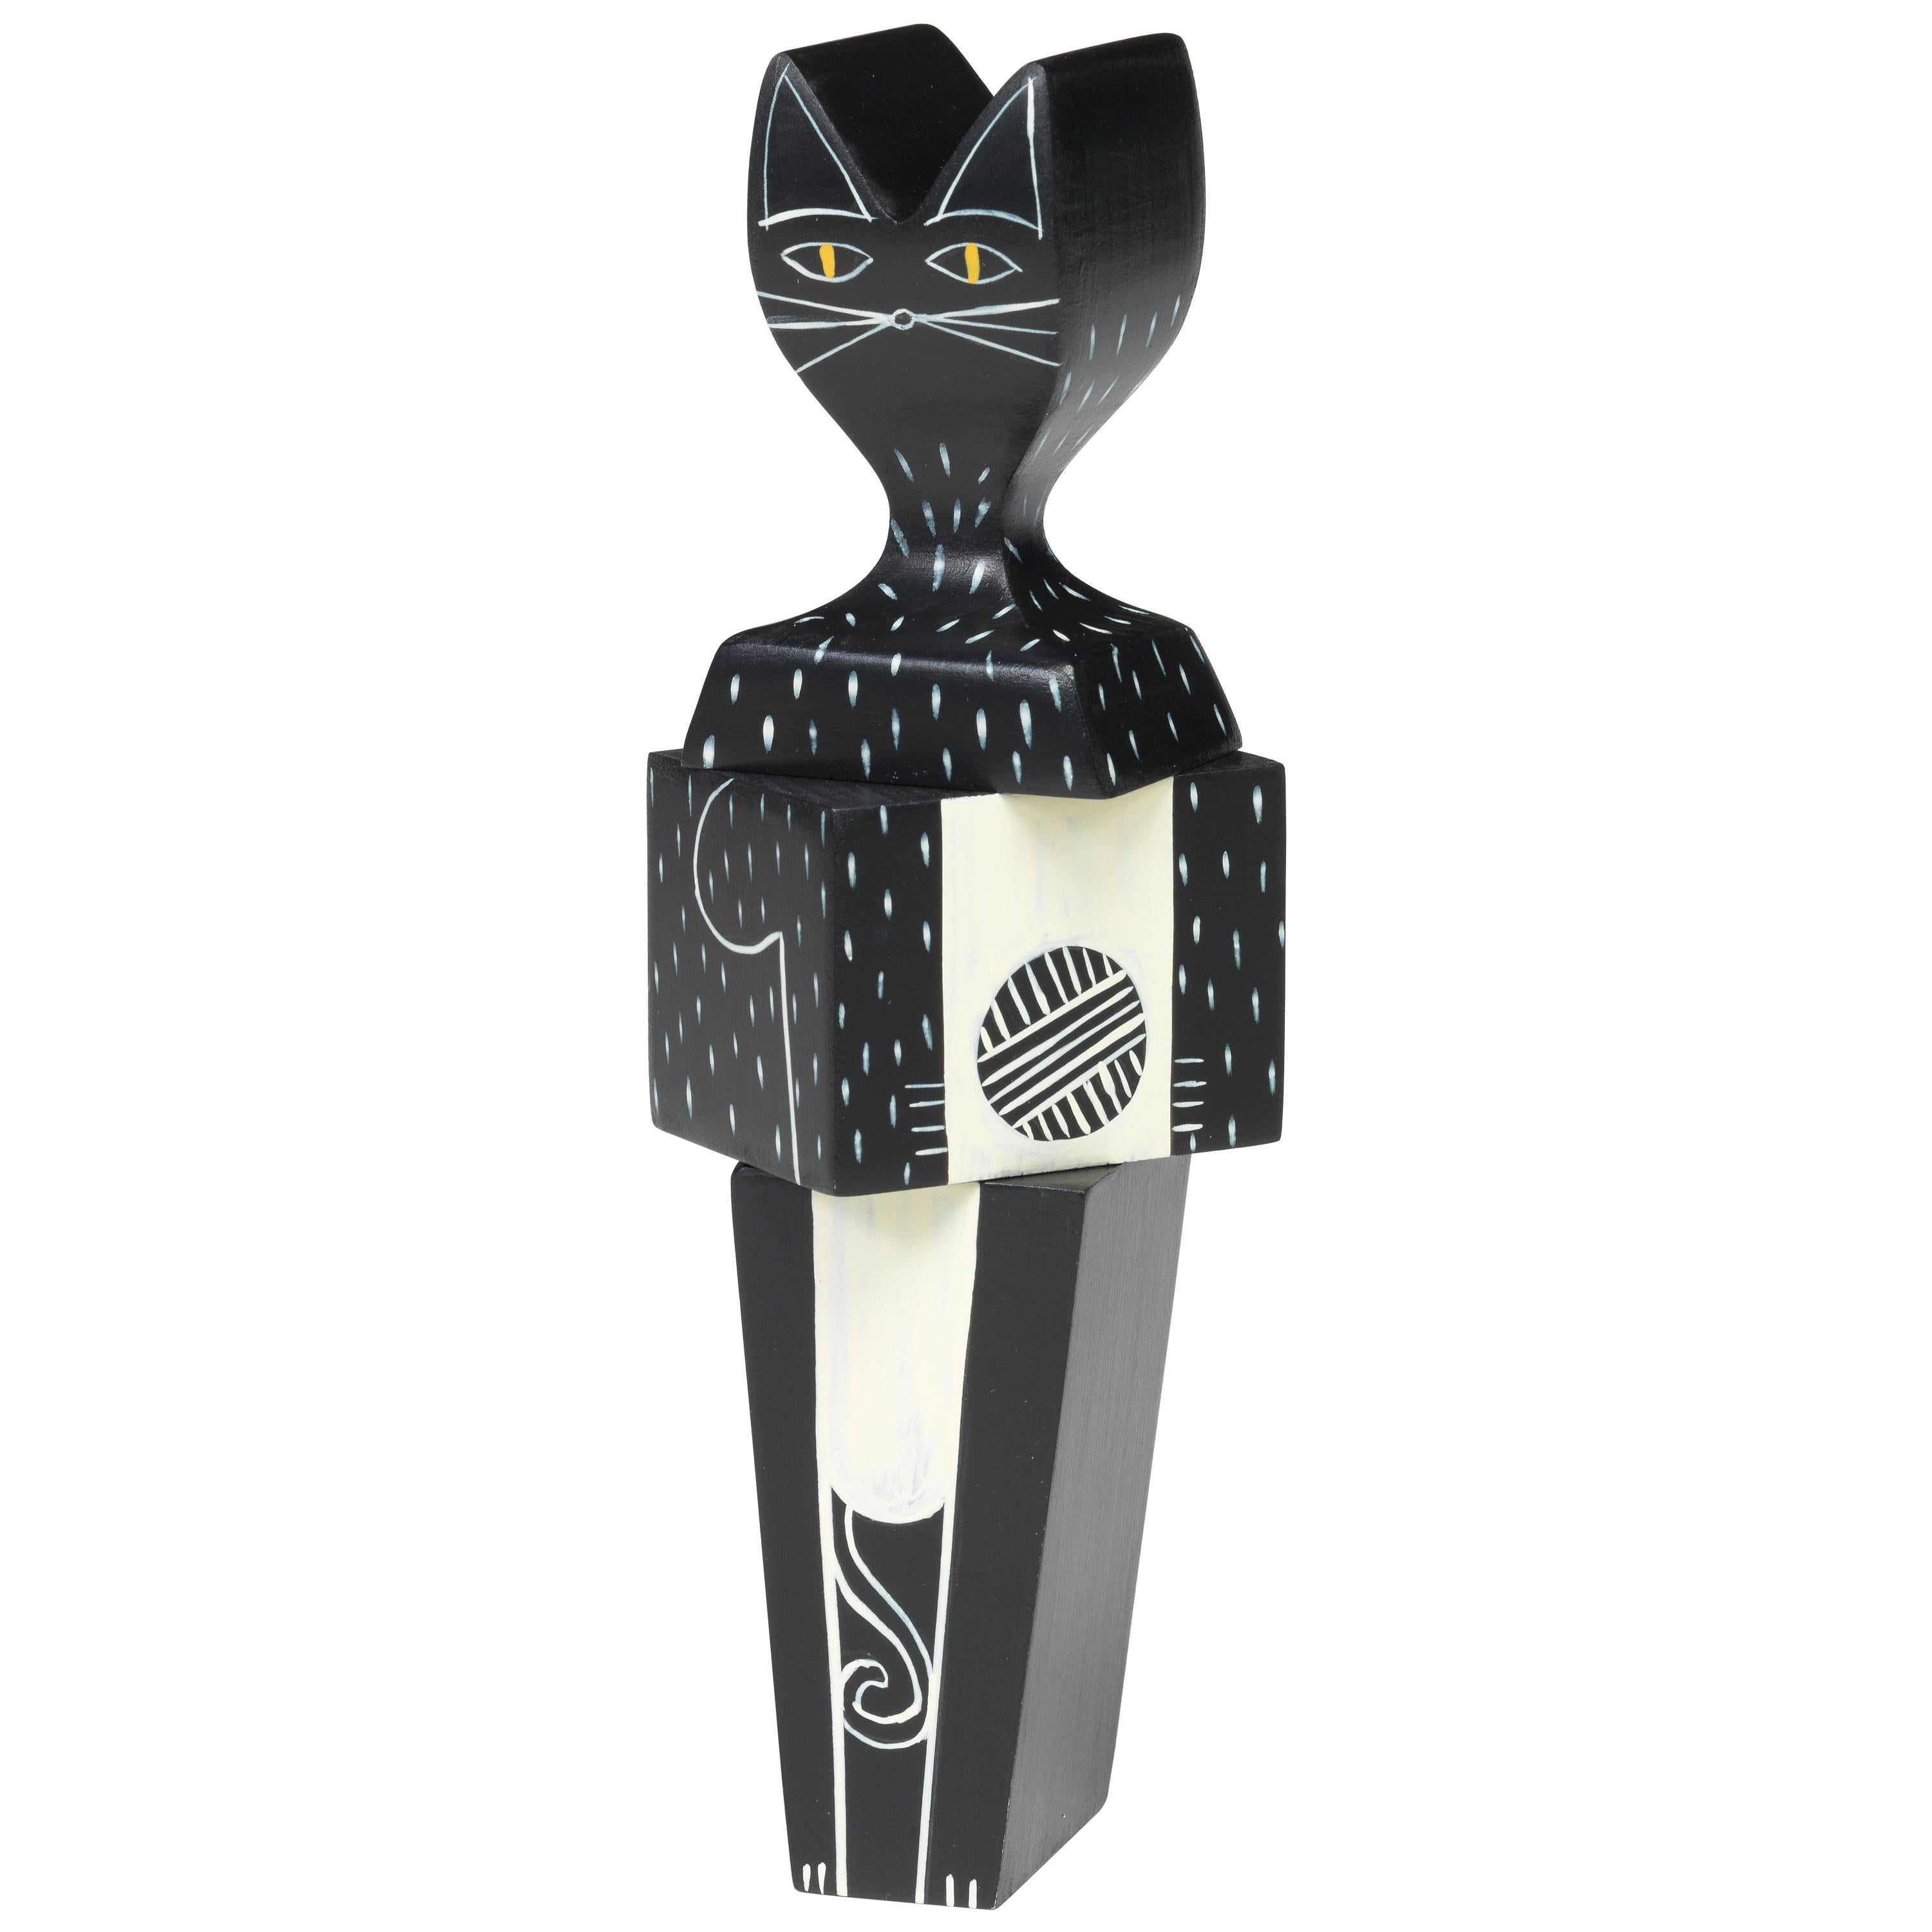 Vitra Wooden Doll Cat Small by Alexander Girard im Angebot